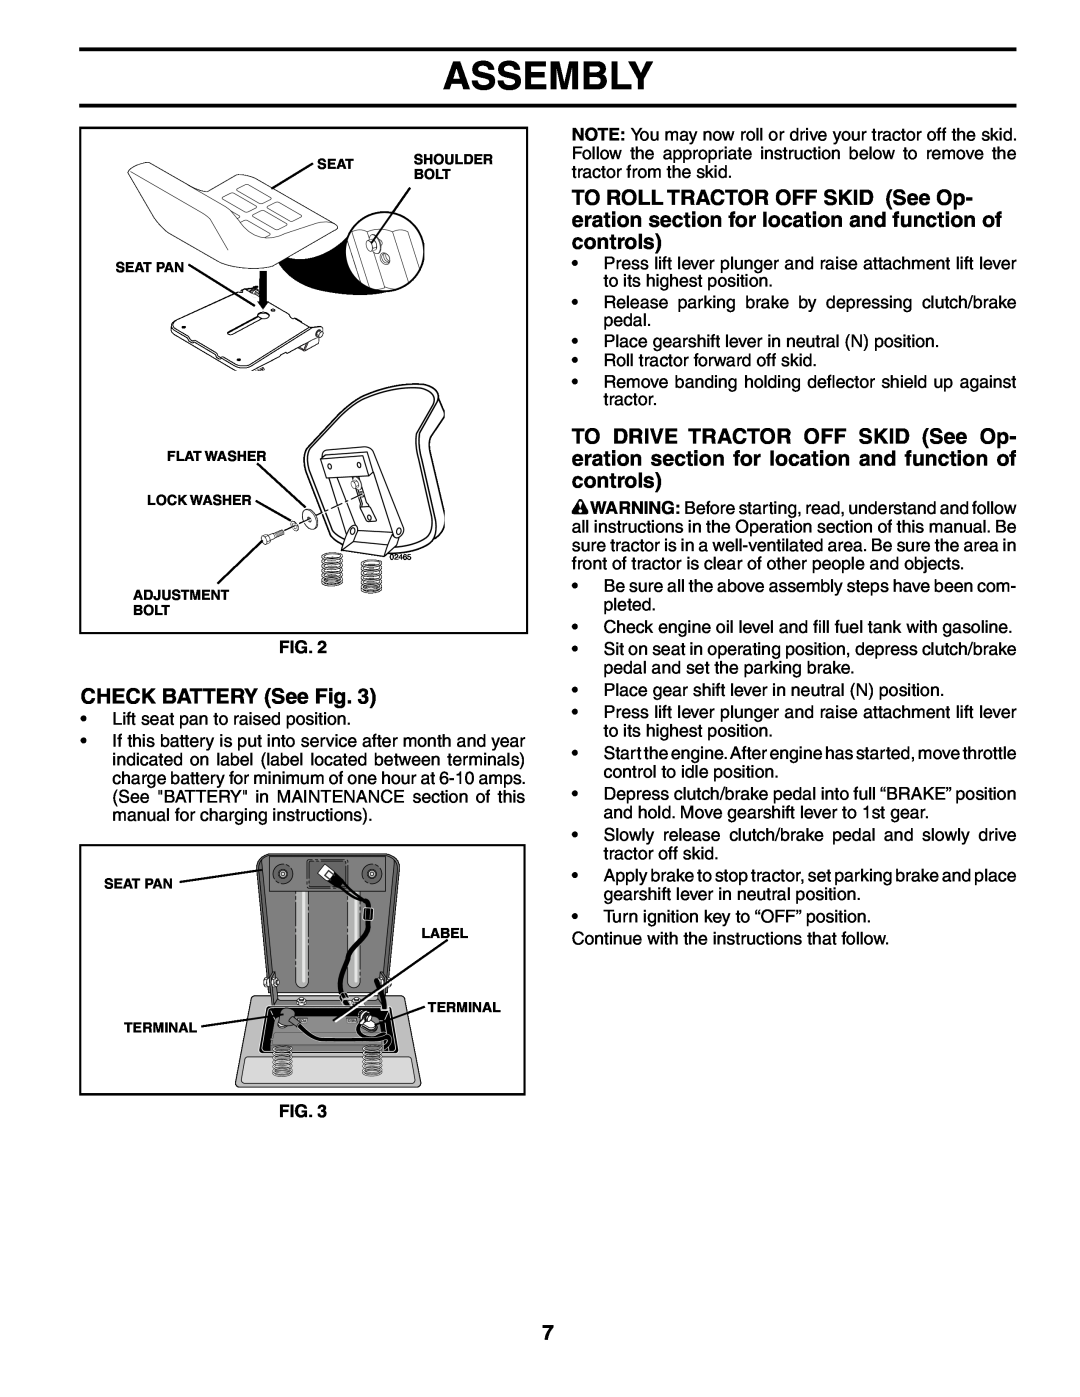 Weed Eater HD13538 manual CHECK BATTERY See Fig, Assembly 